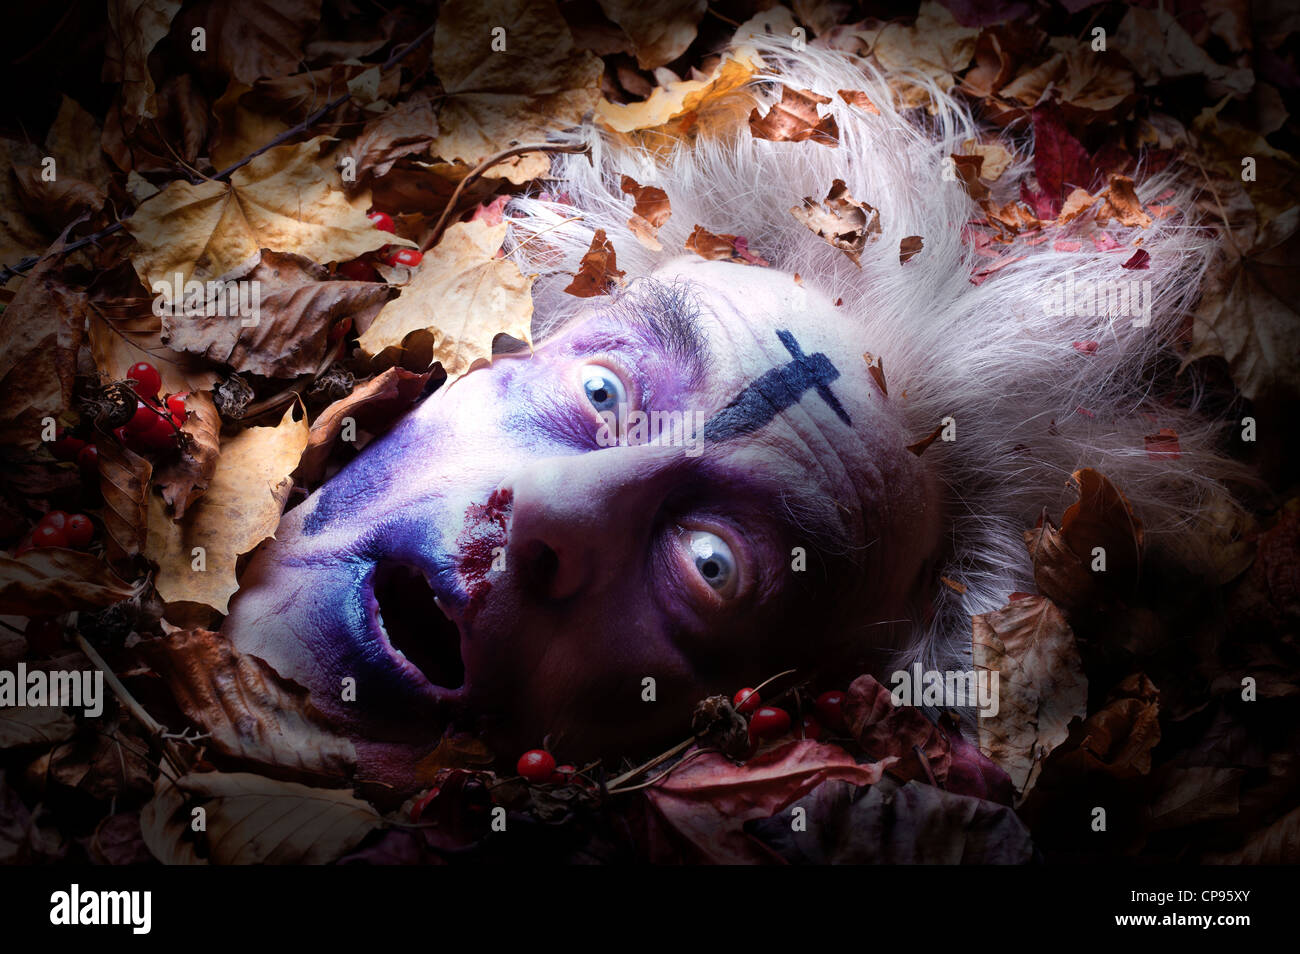 Buried or dead mans head in leaf litter zombie old cross old bodiless Stock Photo